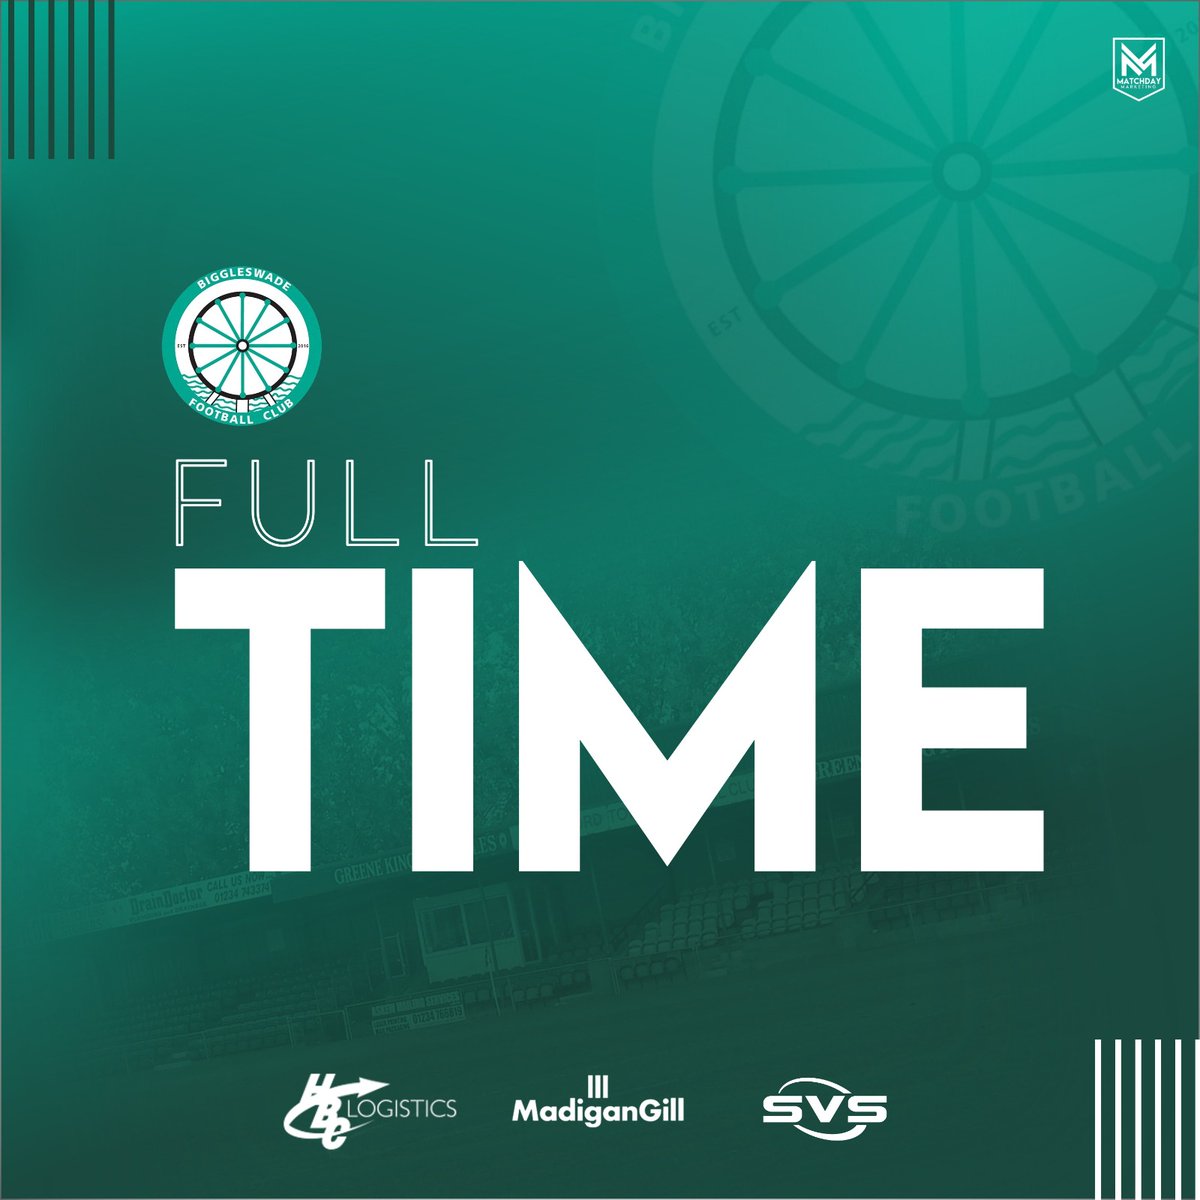 Biggleswade FC 3-1 Stowmarket Town A tough game in tricky conditions, but we get the job done to secure our first-ever win in the FA Trophy. Get in there boys!!! #WeAreFC